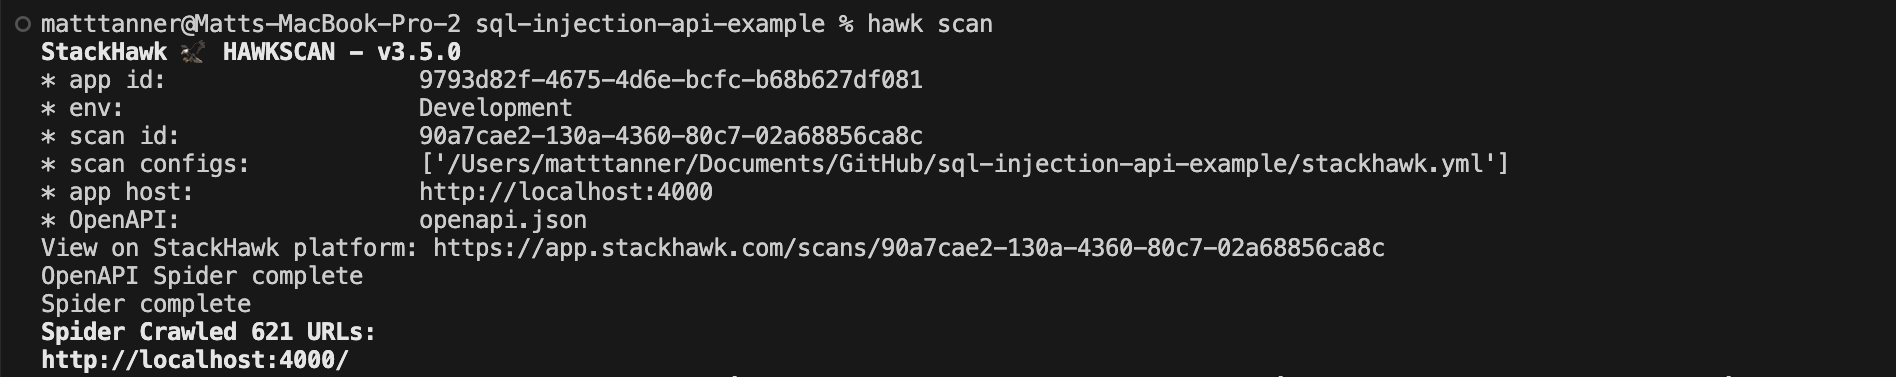 HawkScan command running in the terminal image